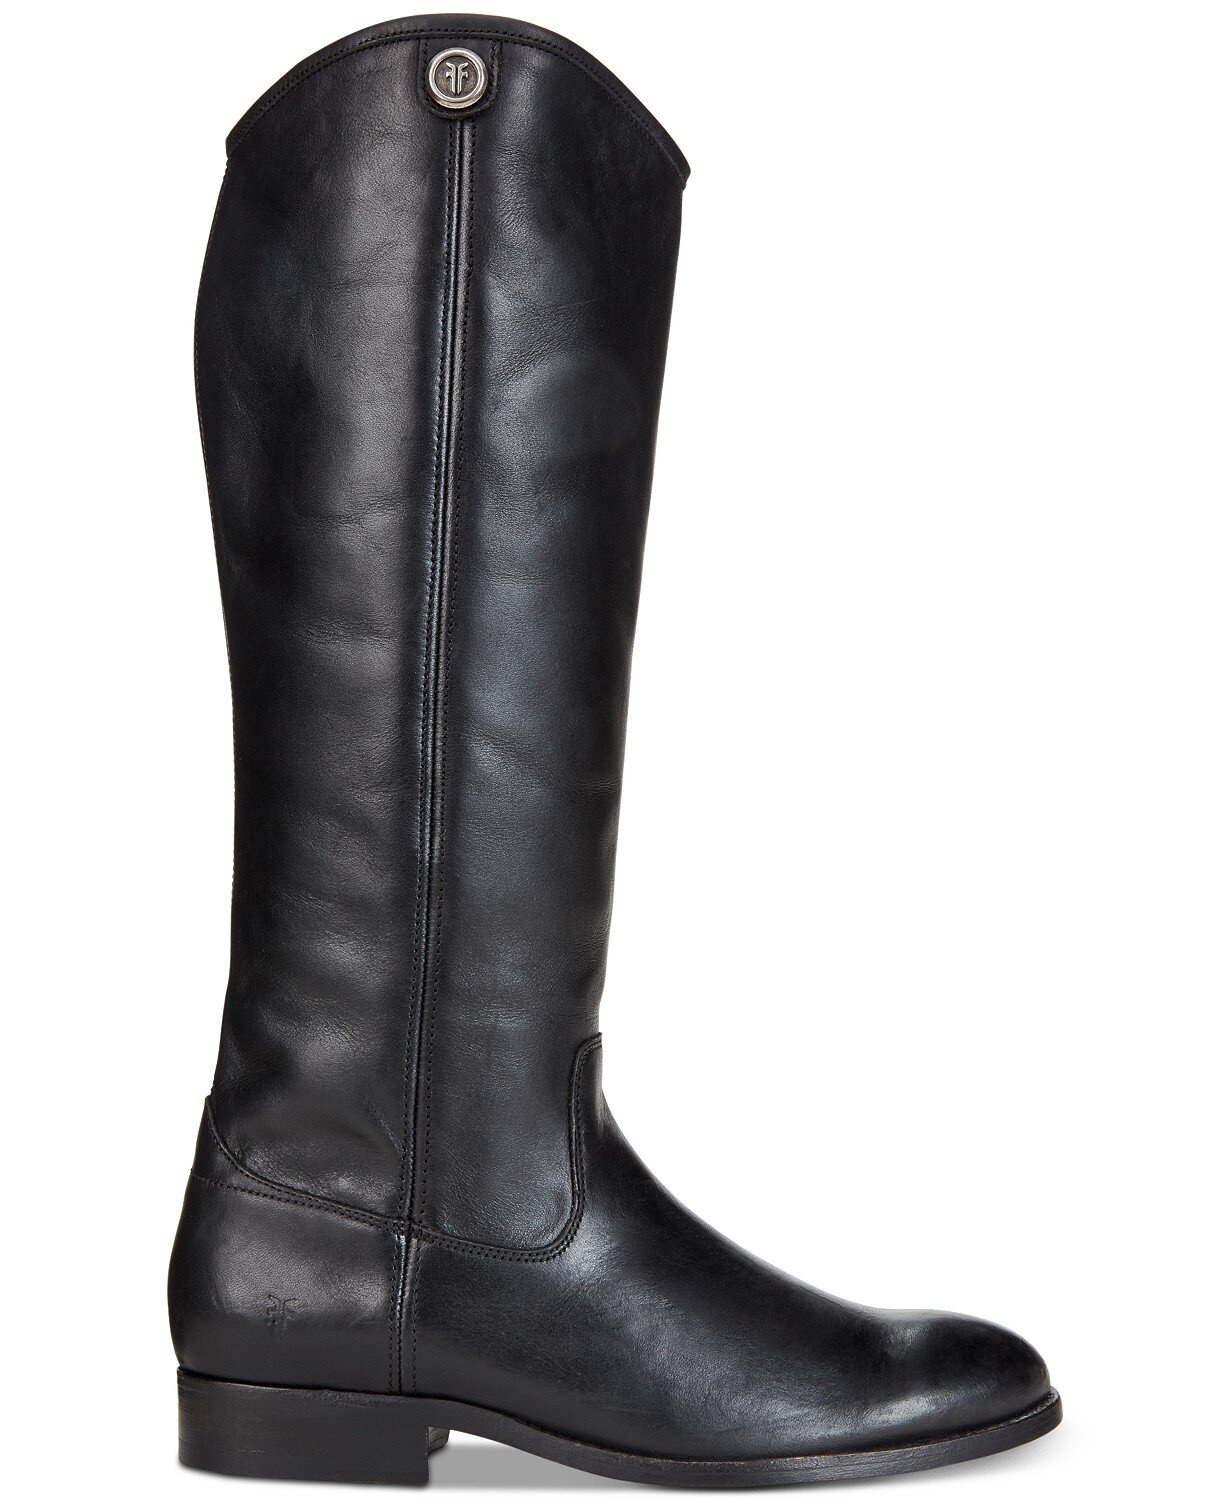 Best Knee-High Boots For Wide Calves 